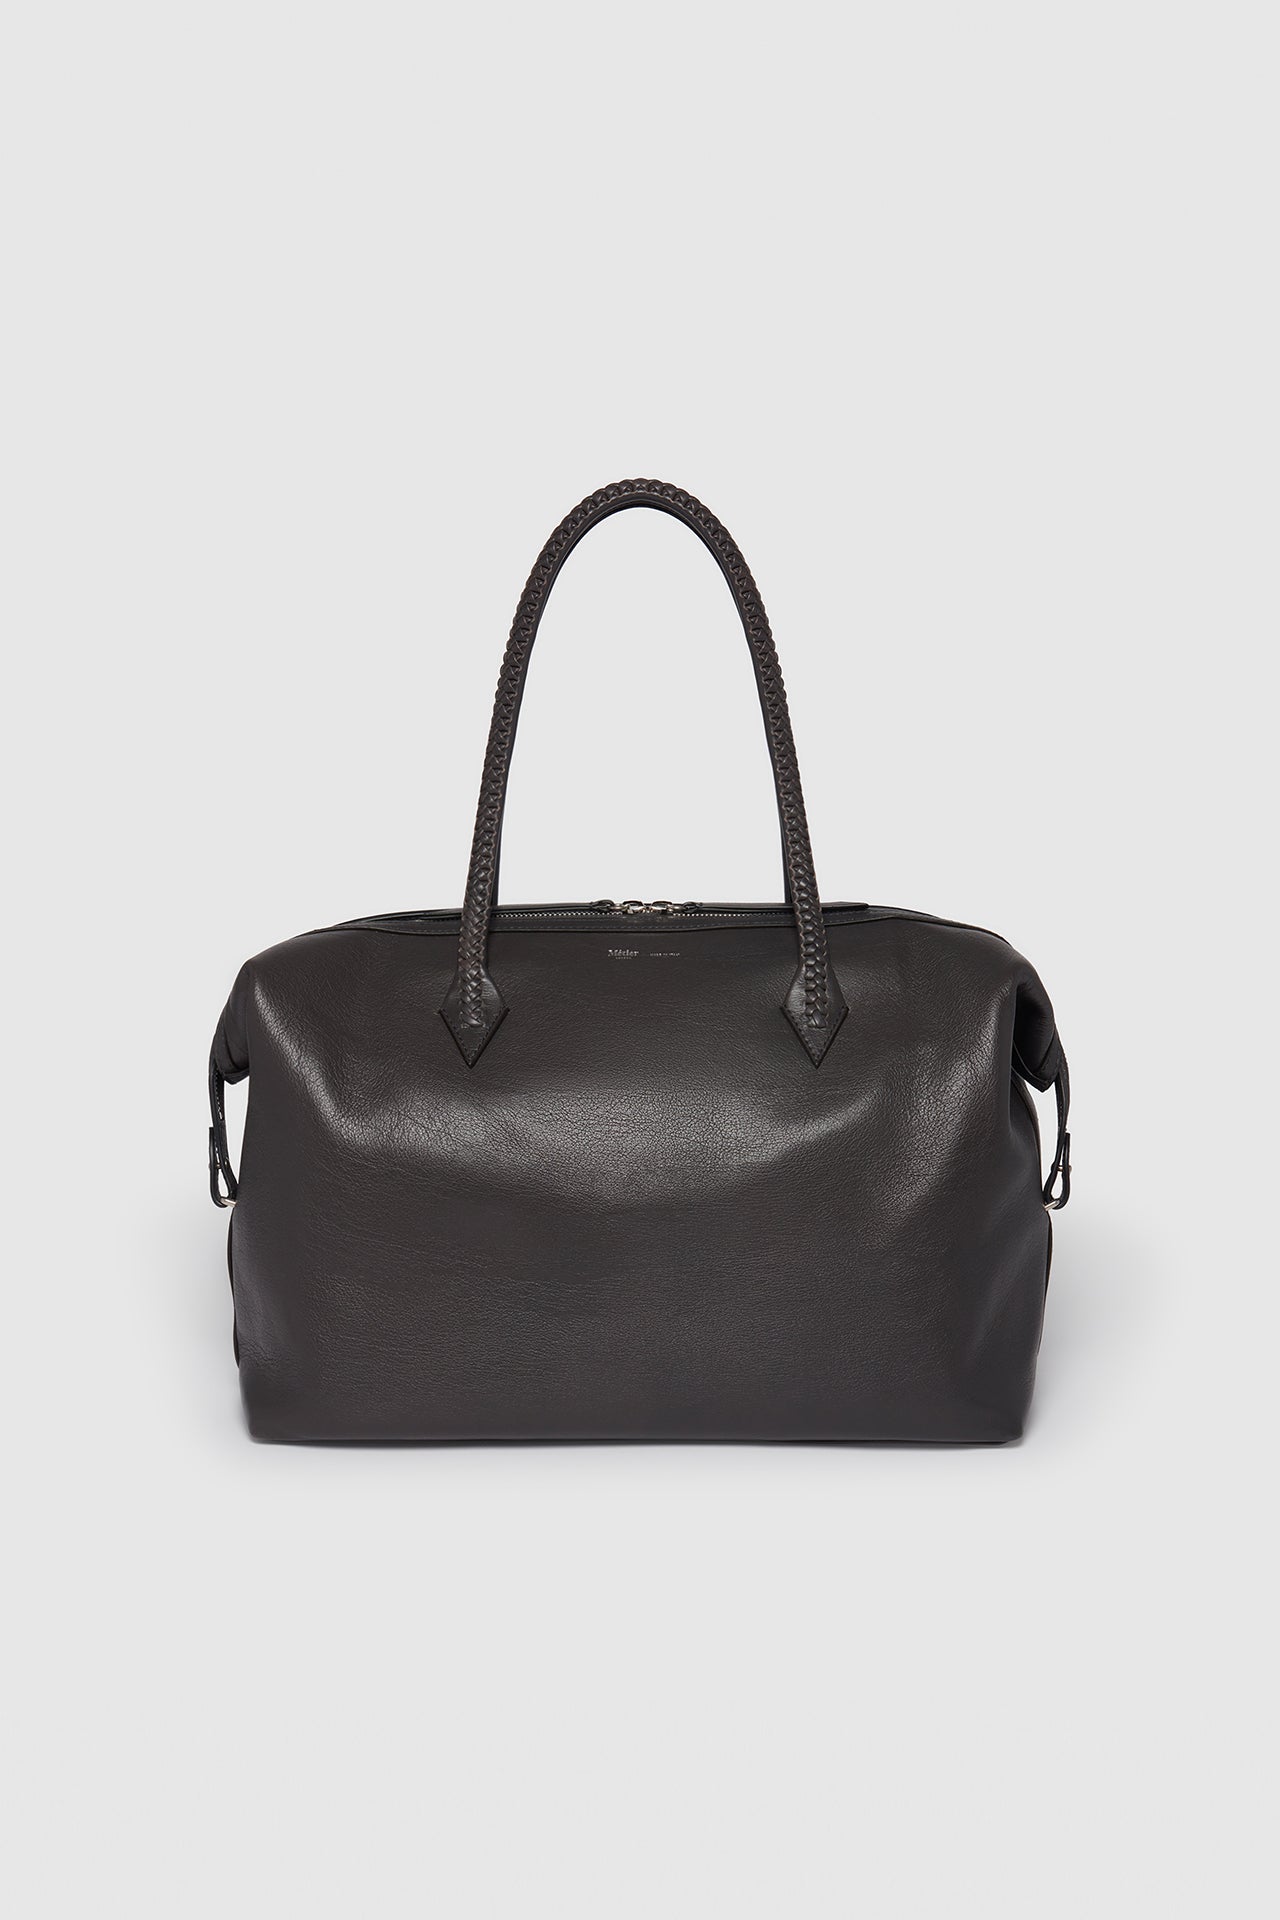 Anthracite Perriand All Day Bag